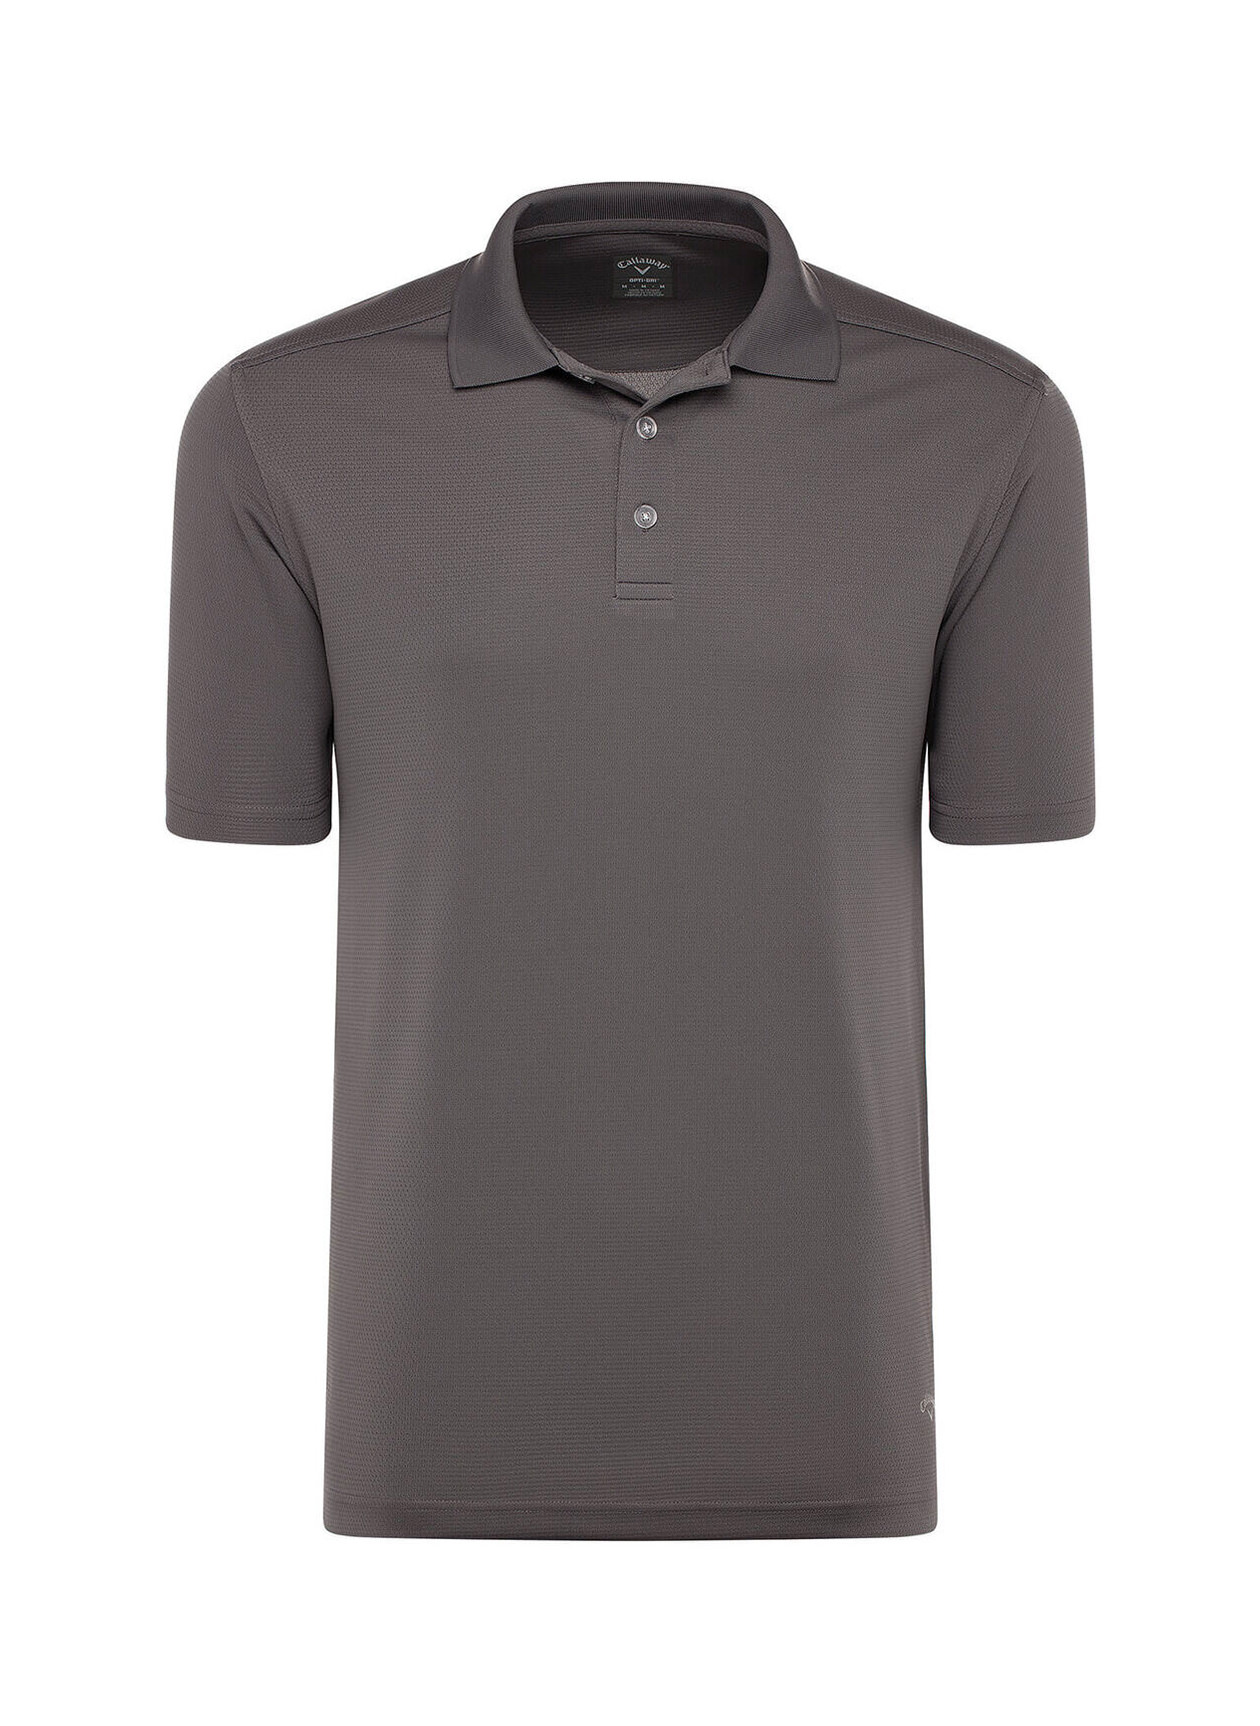 Callaway Men's Smoked Pearl Core Performance Polo | Customized Polos